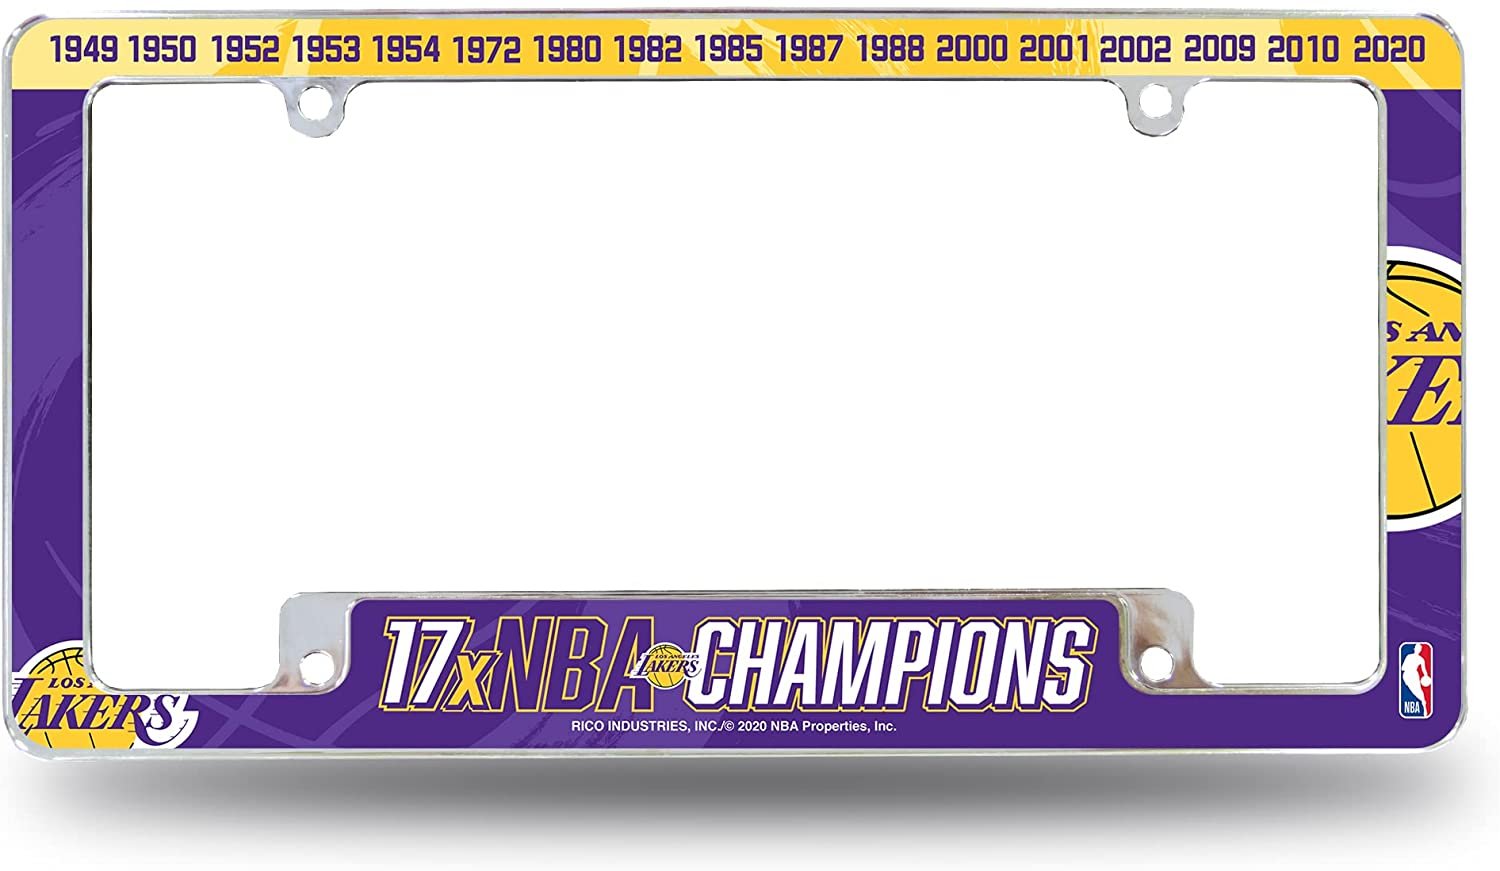 Los Angeles Lakers Metal License Plate Frame Tag Cover 17 Time Champions 12x6 Inch